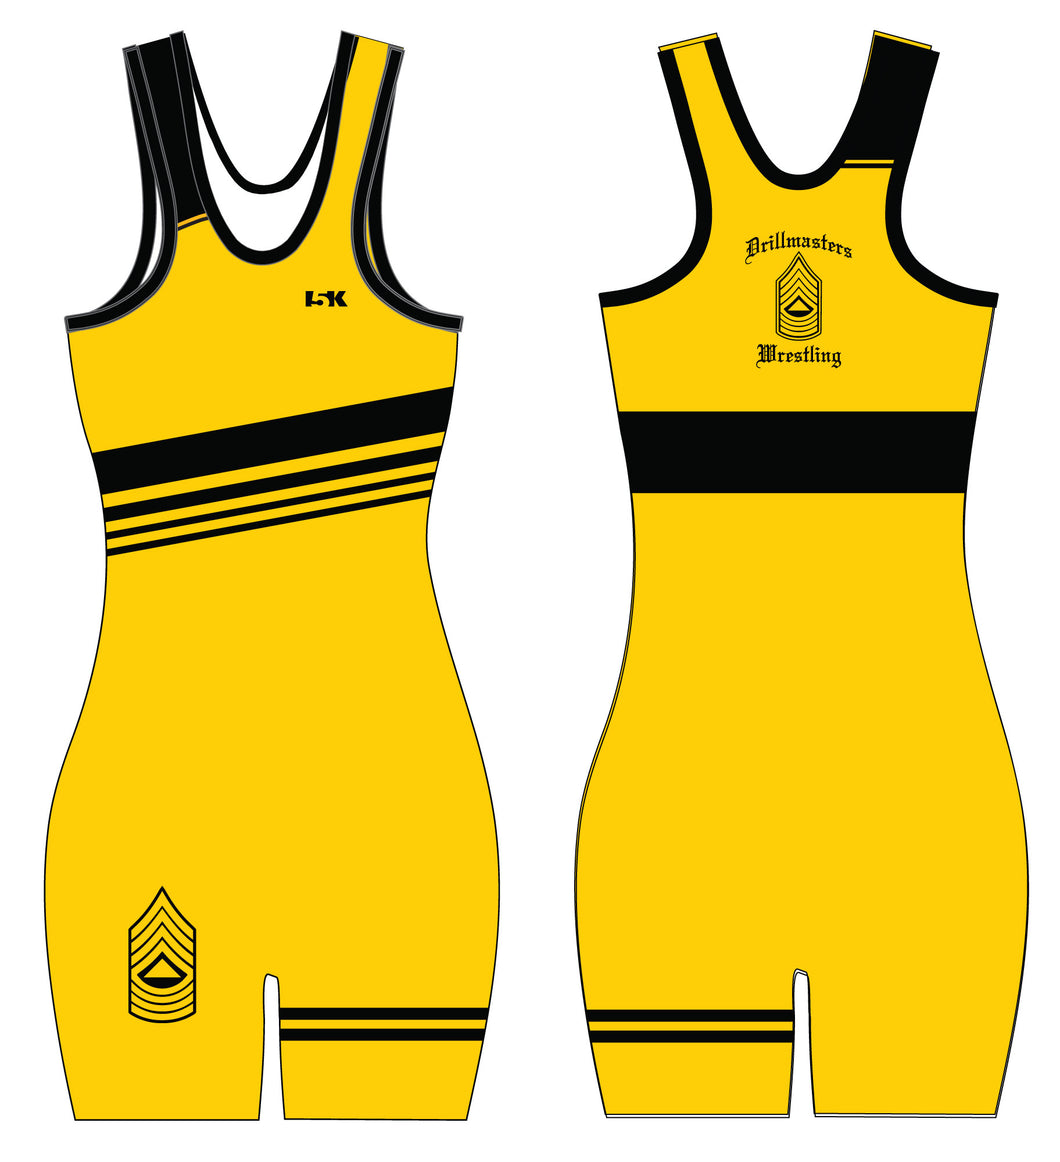 Drill Masters Wrestling Sublimated Women's Singlet - Yellow - 5KounT